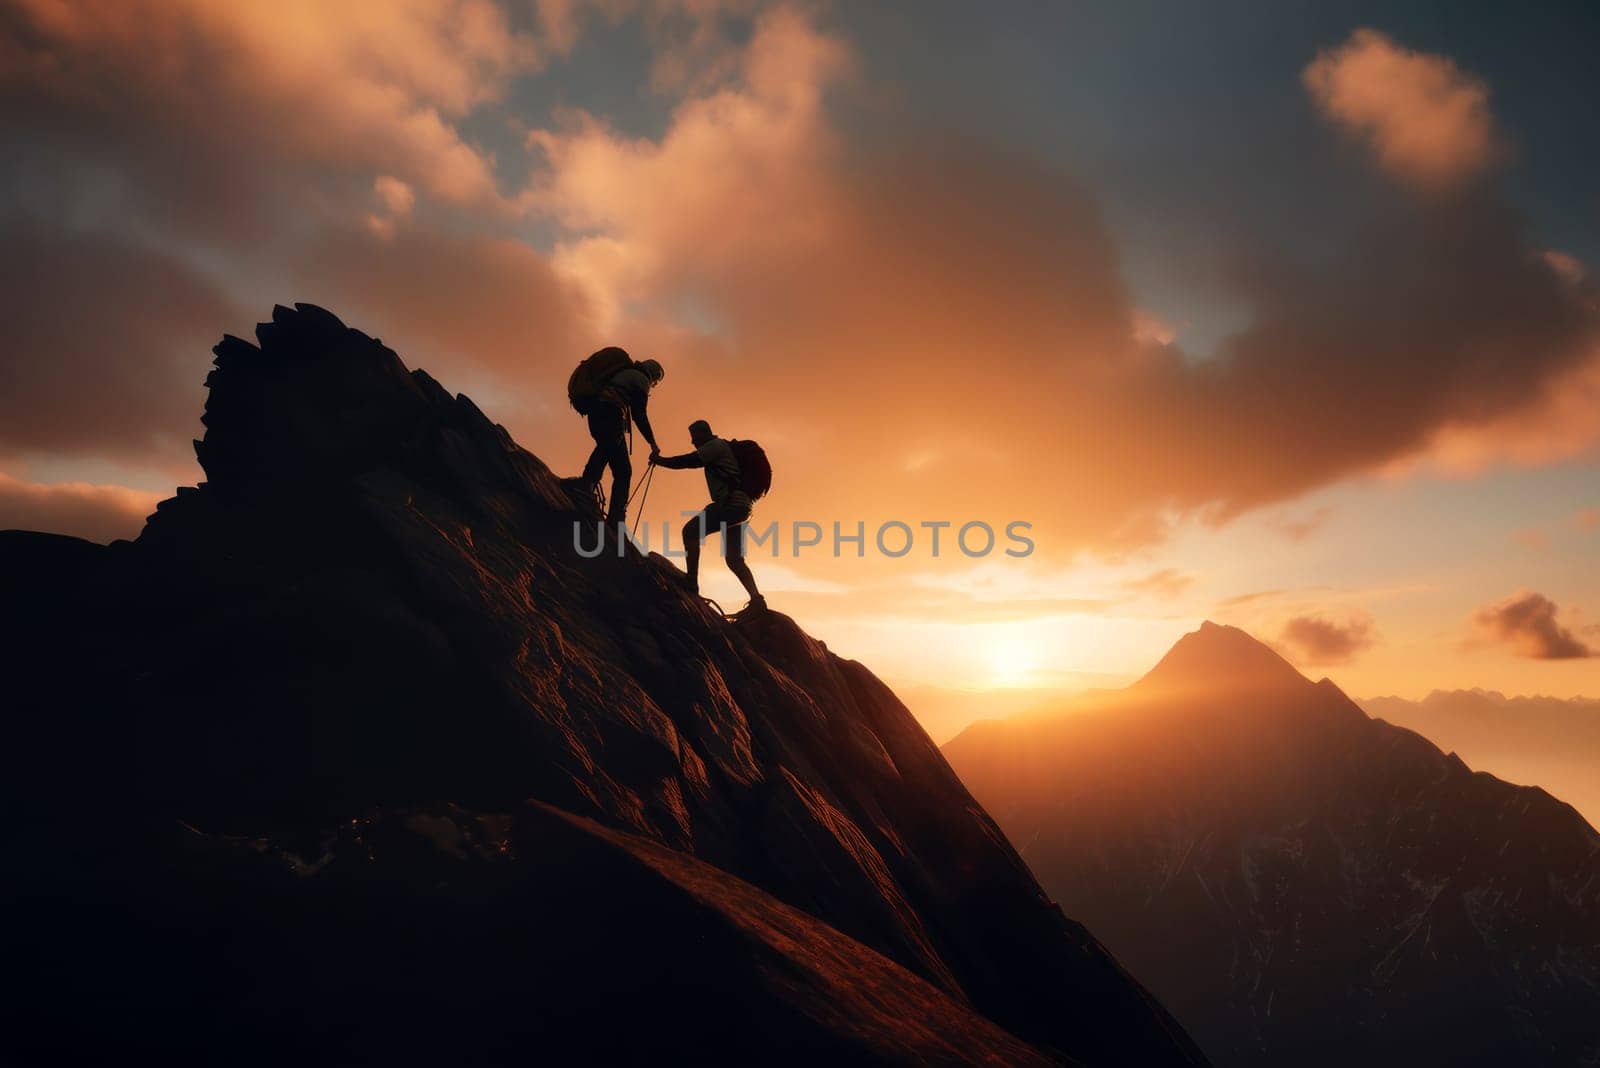 Silhouettes of people climbing the mountain by simpson33